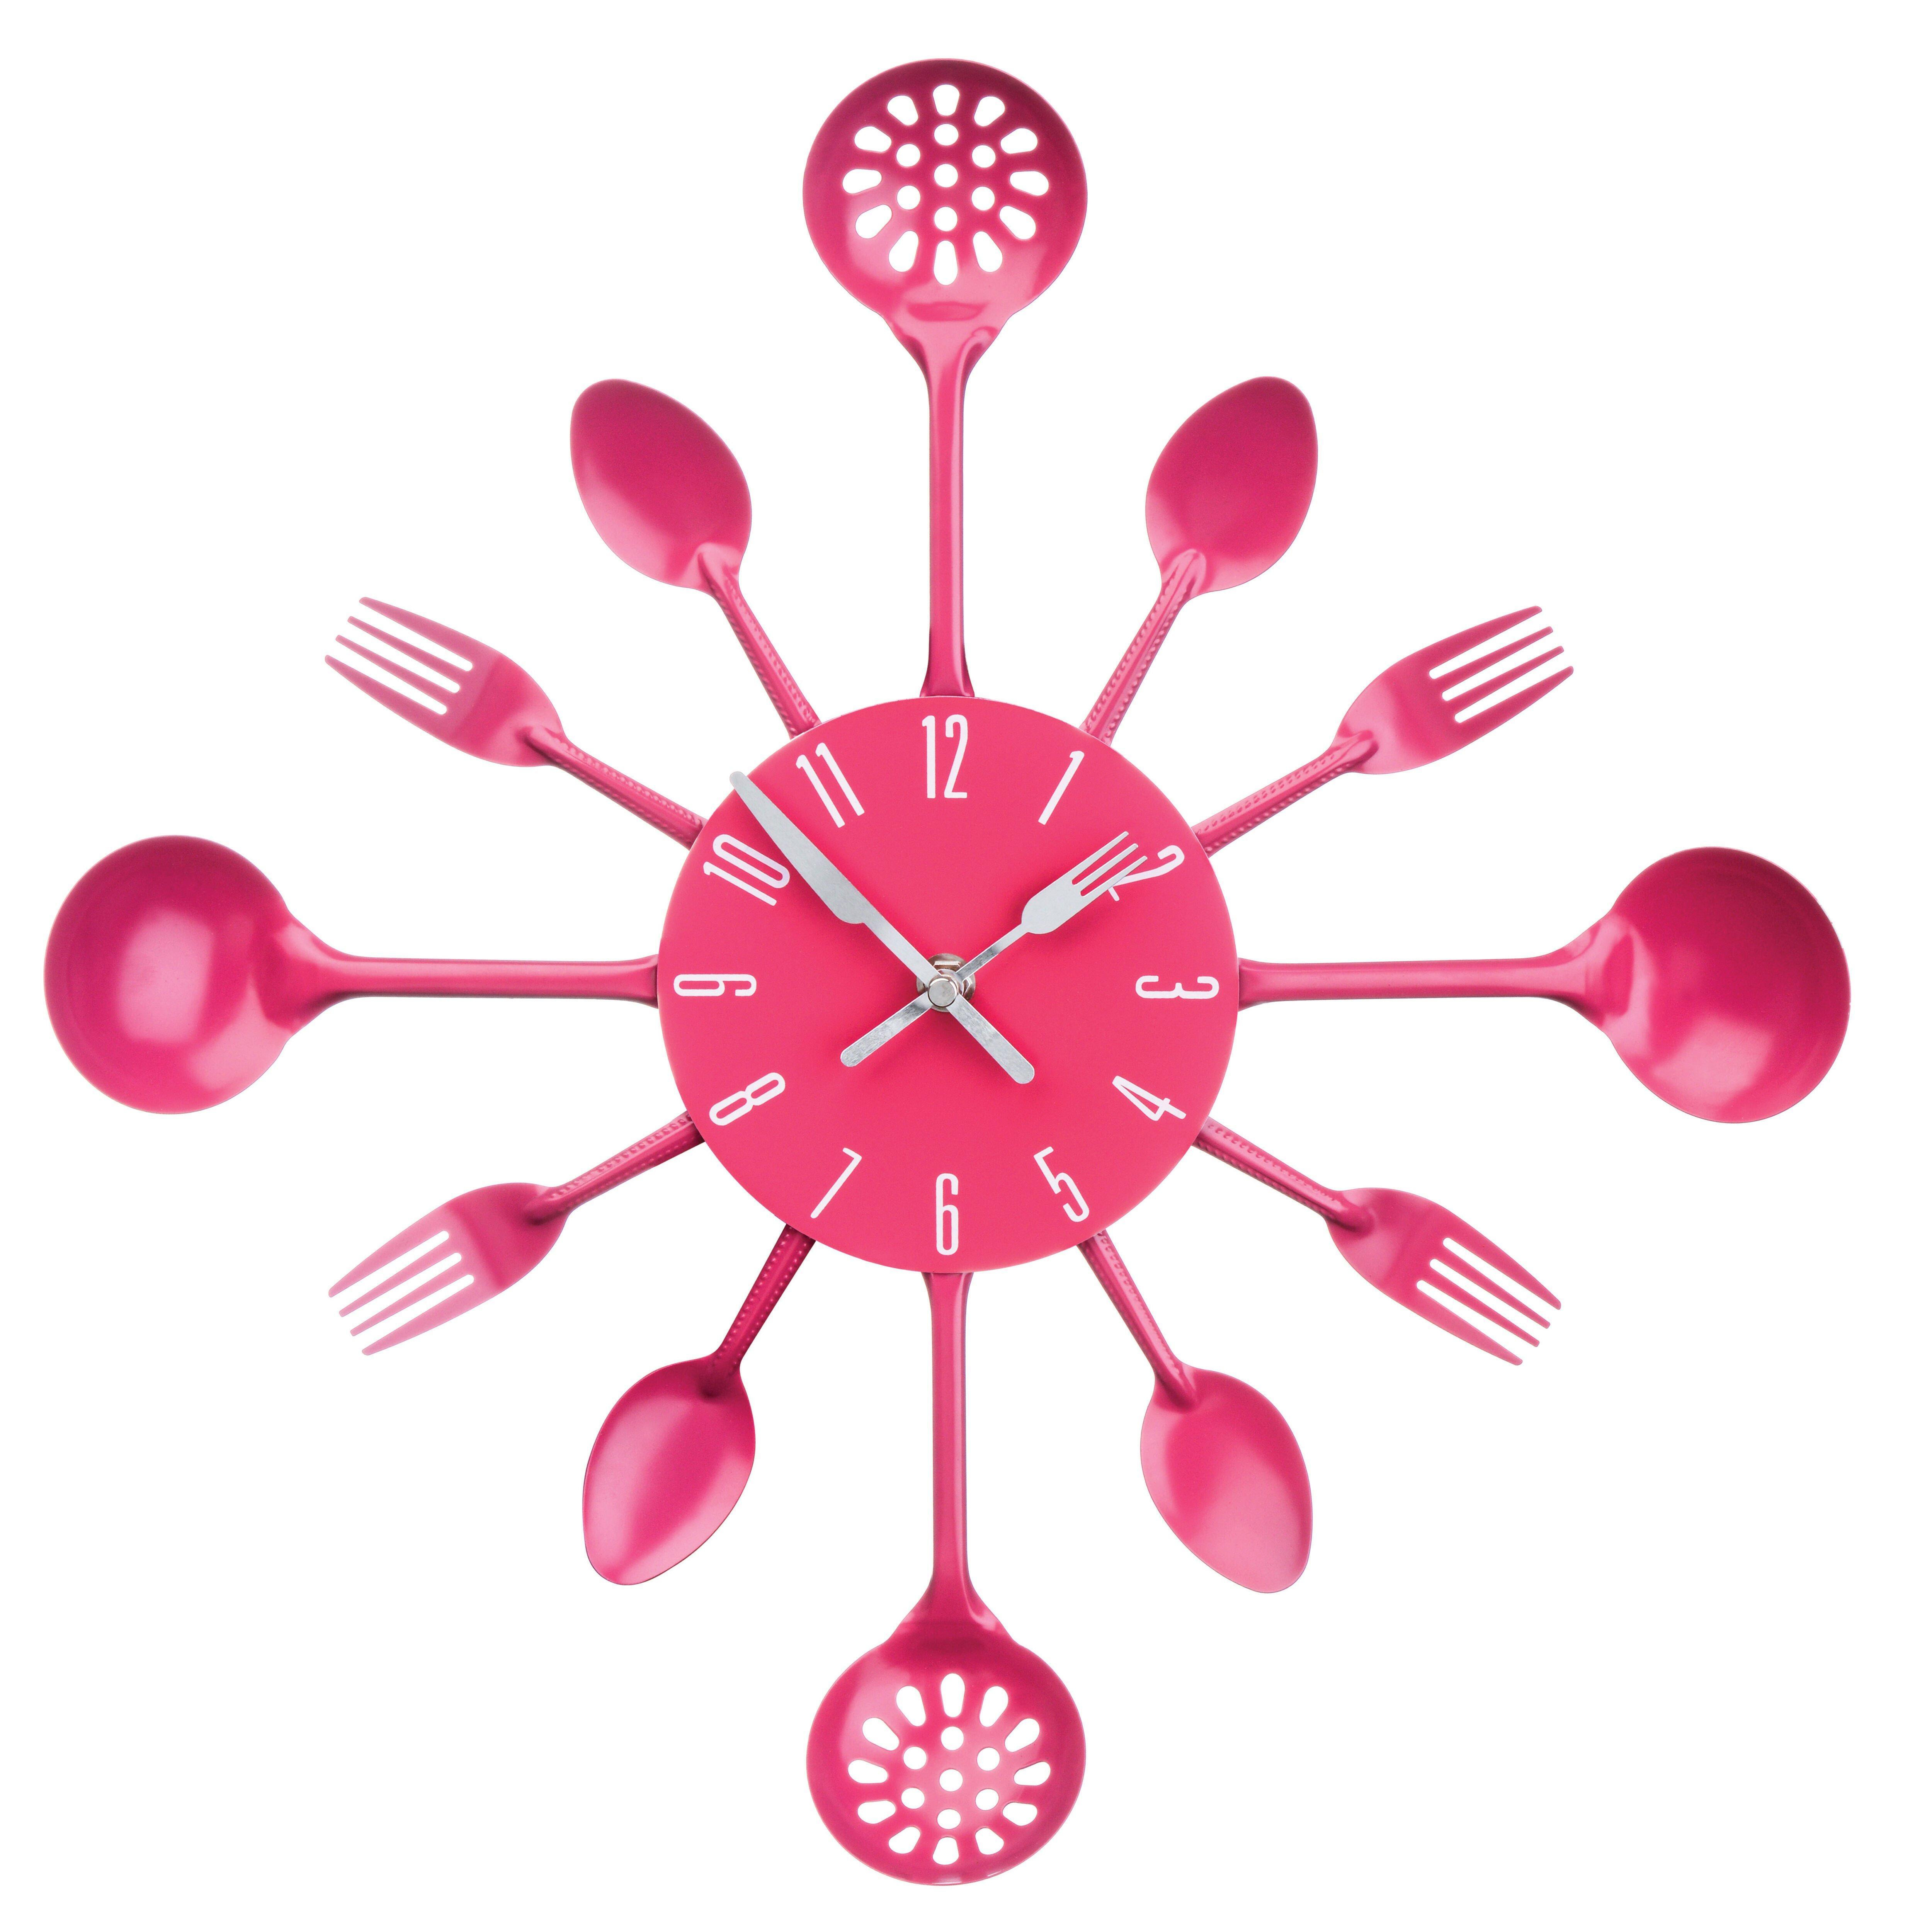 Maison by Premier Cutlery Metal Wall Clock - image 1